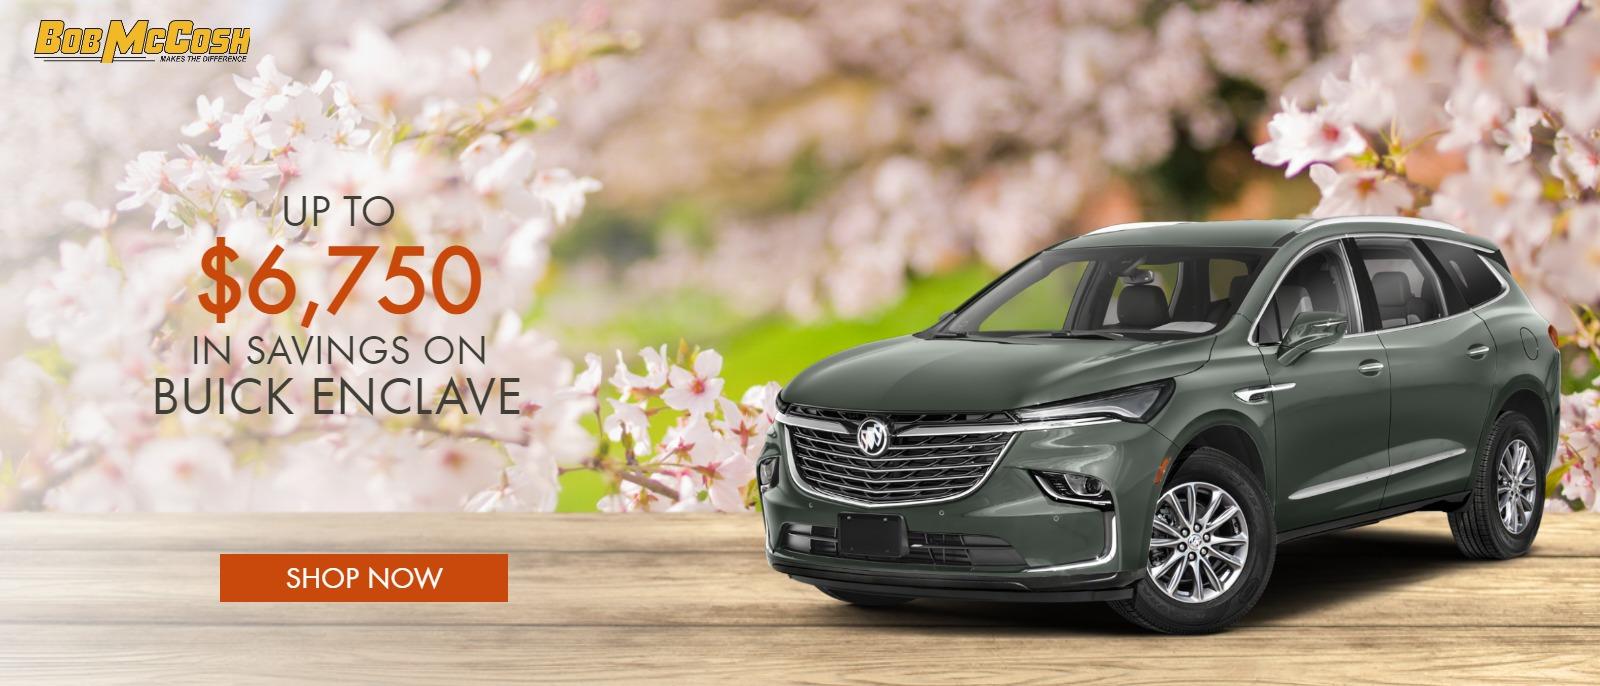 UP TO $6750 IN SAVINGS ON BUICK ENCLAVE.